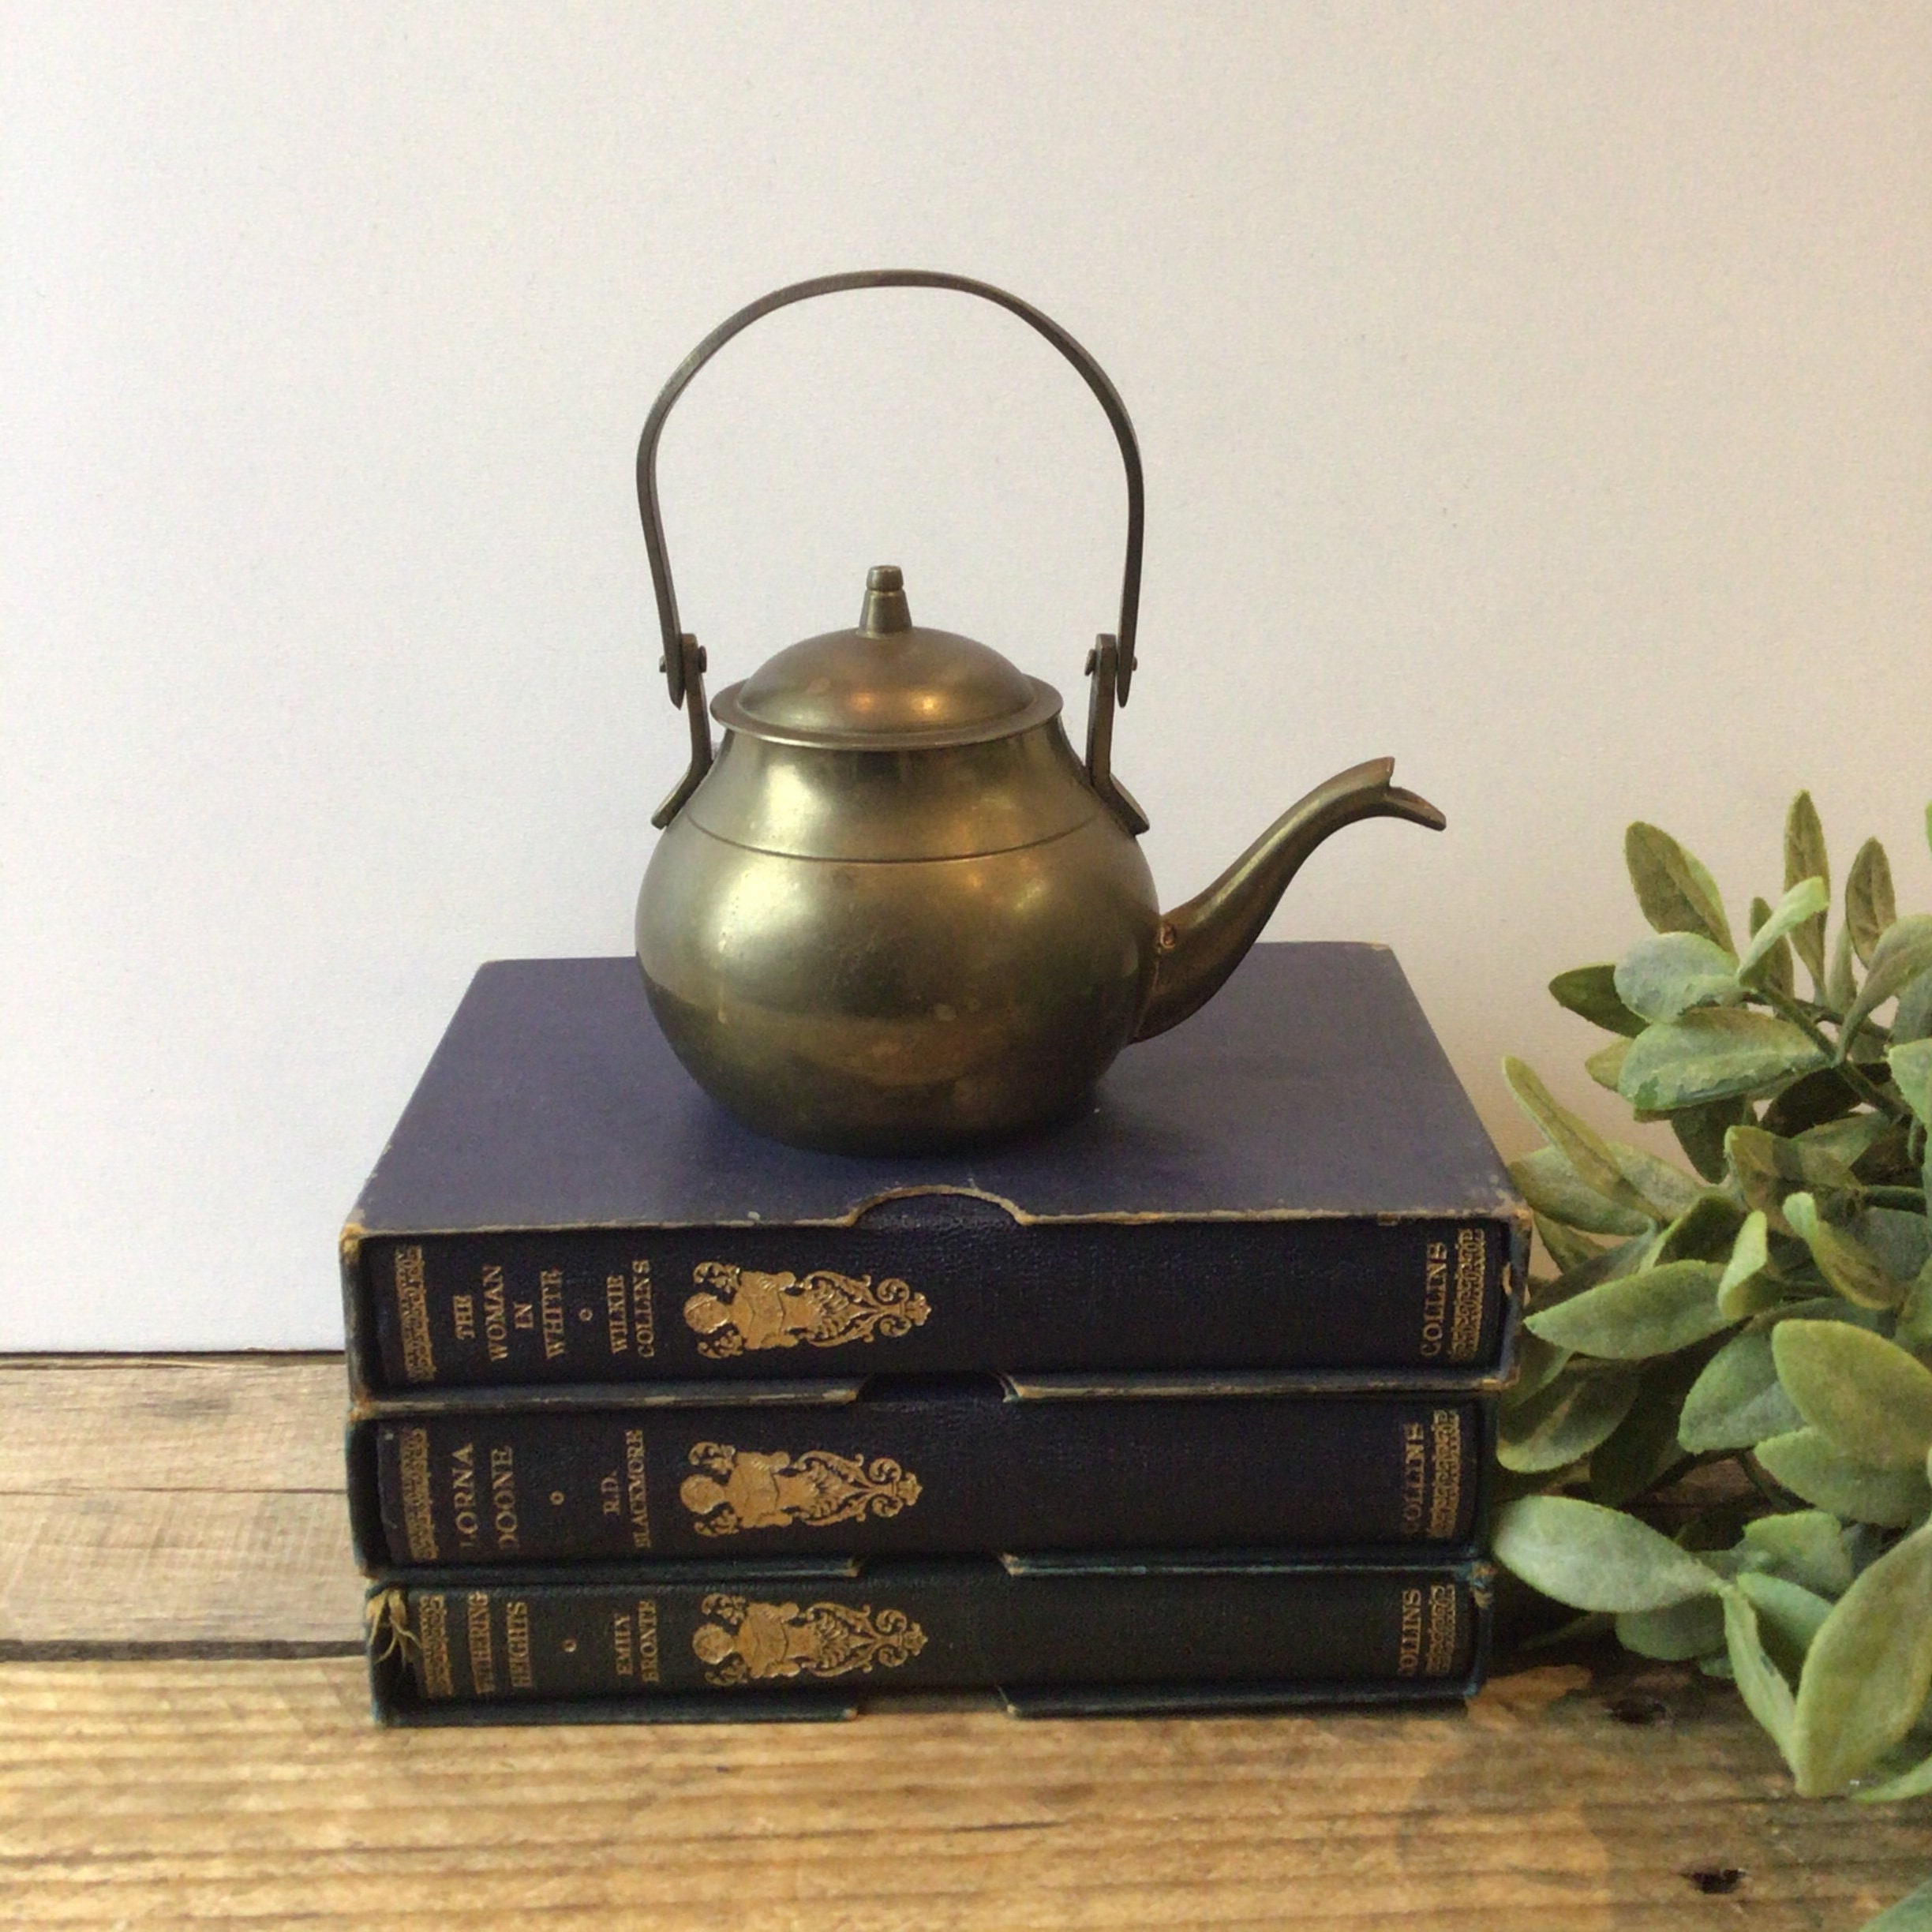 Antique Tilting Brass Teapot With Stand by Manning Bowman Quality Meriden  Conn Early 1900s -  Canada